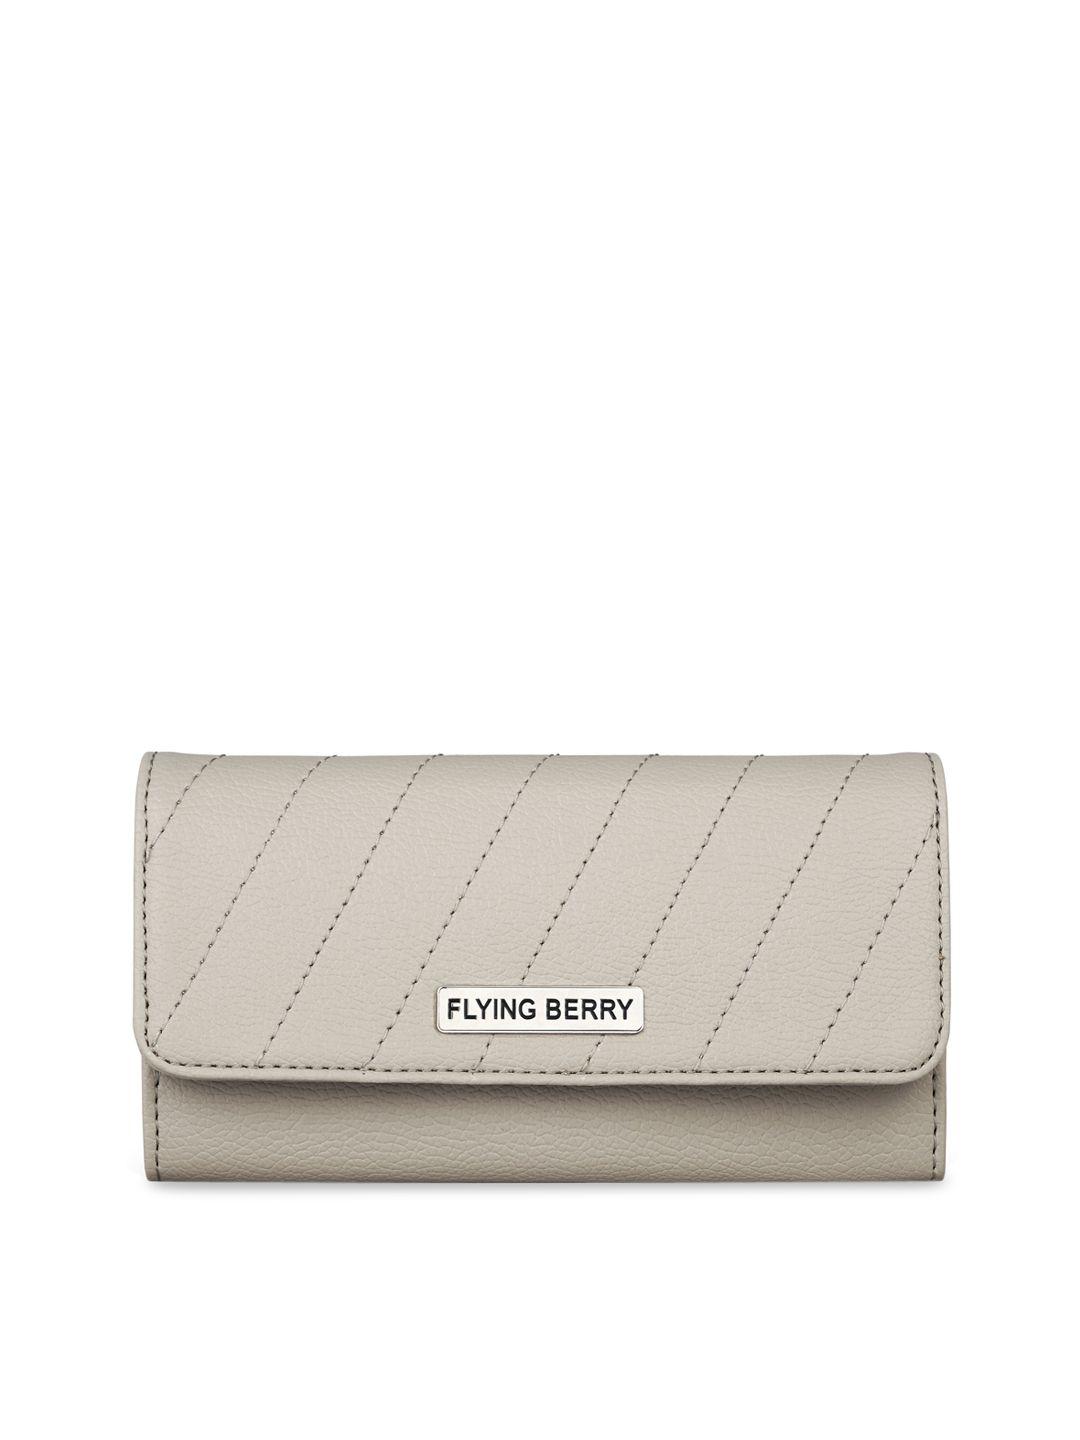 flying berry grey striped envelope clutch